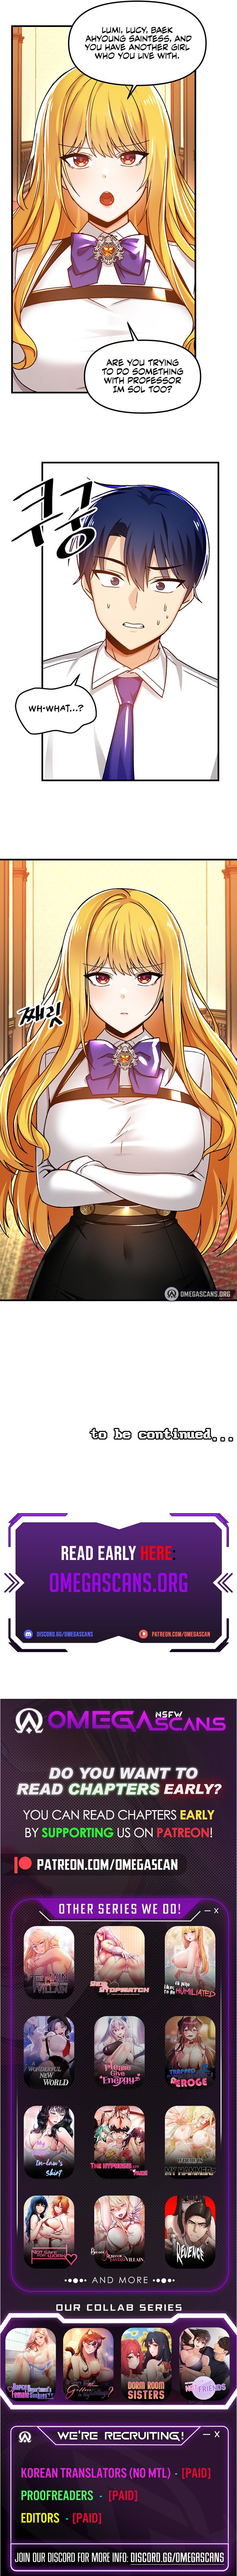 trapped-in-the-academys-eroge-chap-45-6